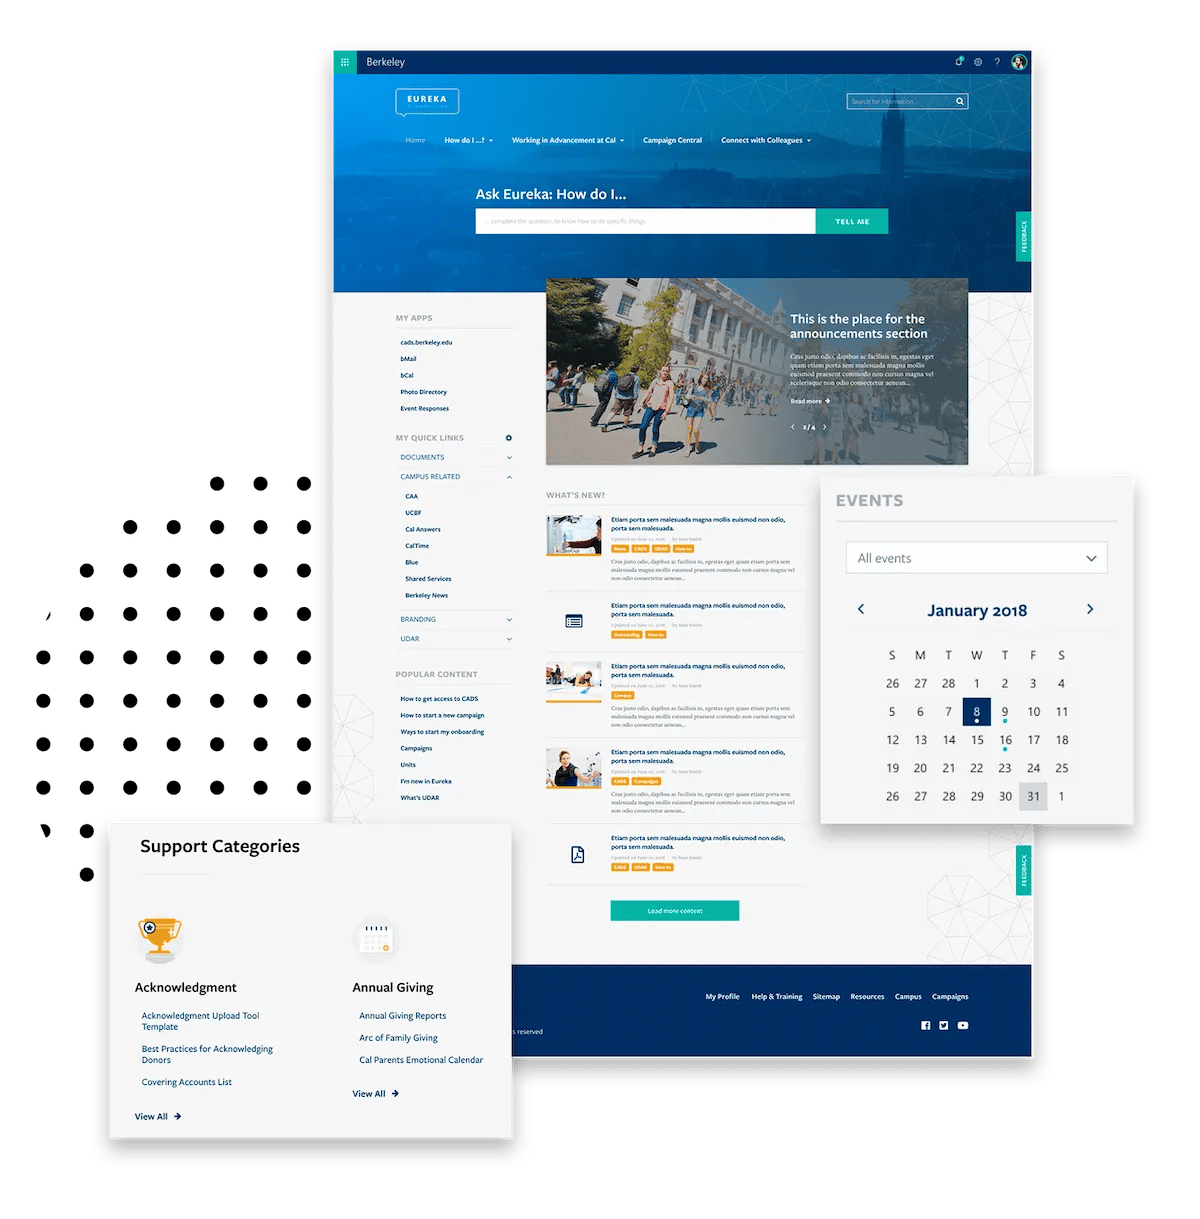 SharePoint Intranet Services